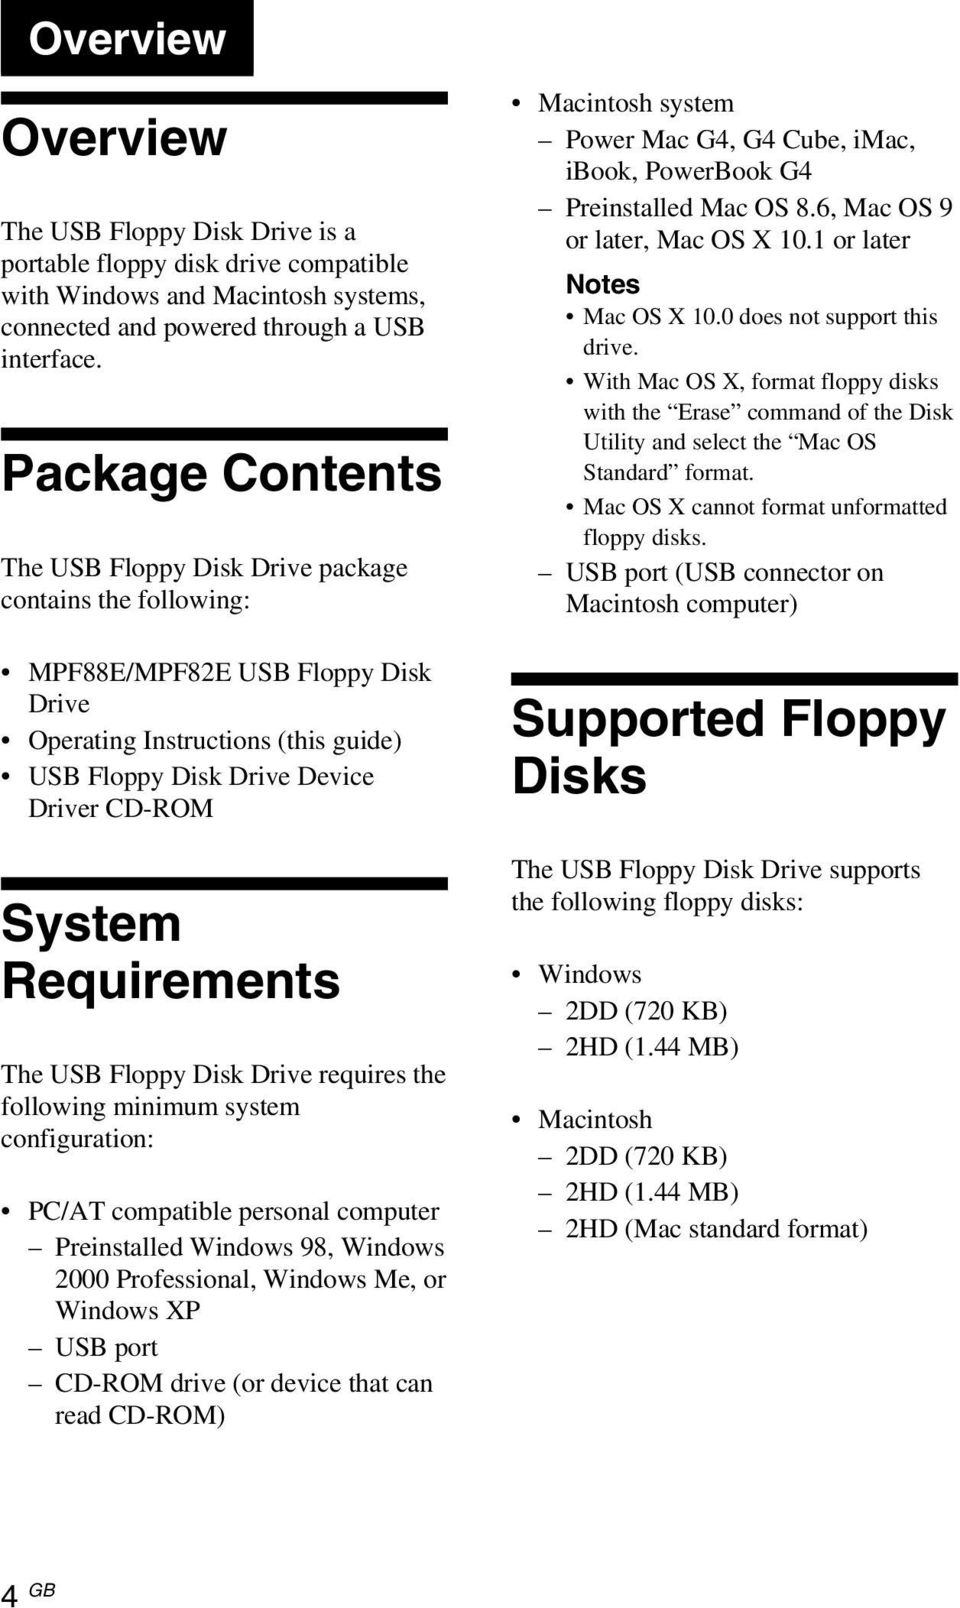 Requirements The USB Floppy Disk Drive requires the following minimum system configuration: PC/AT compatible personal computer Preinstalled Windows 98, Windows 2000 Professional, Windows Me, or